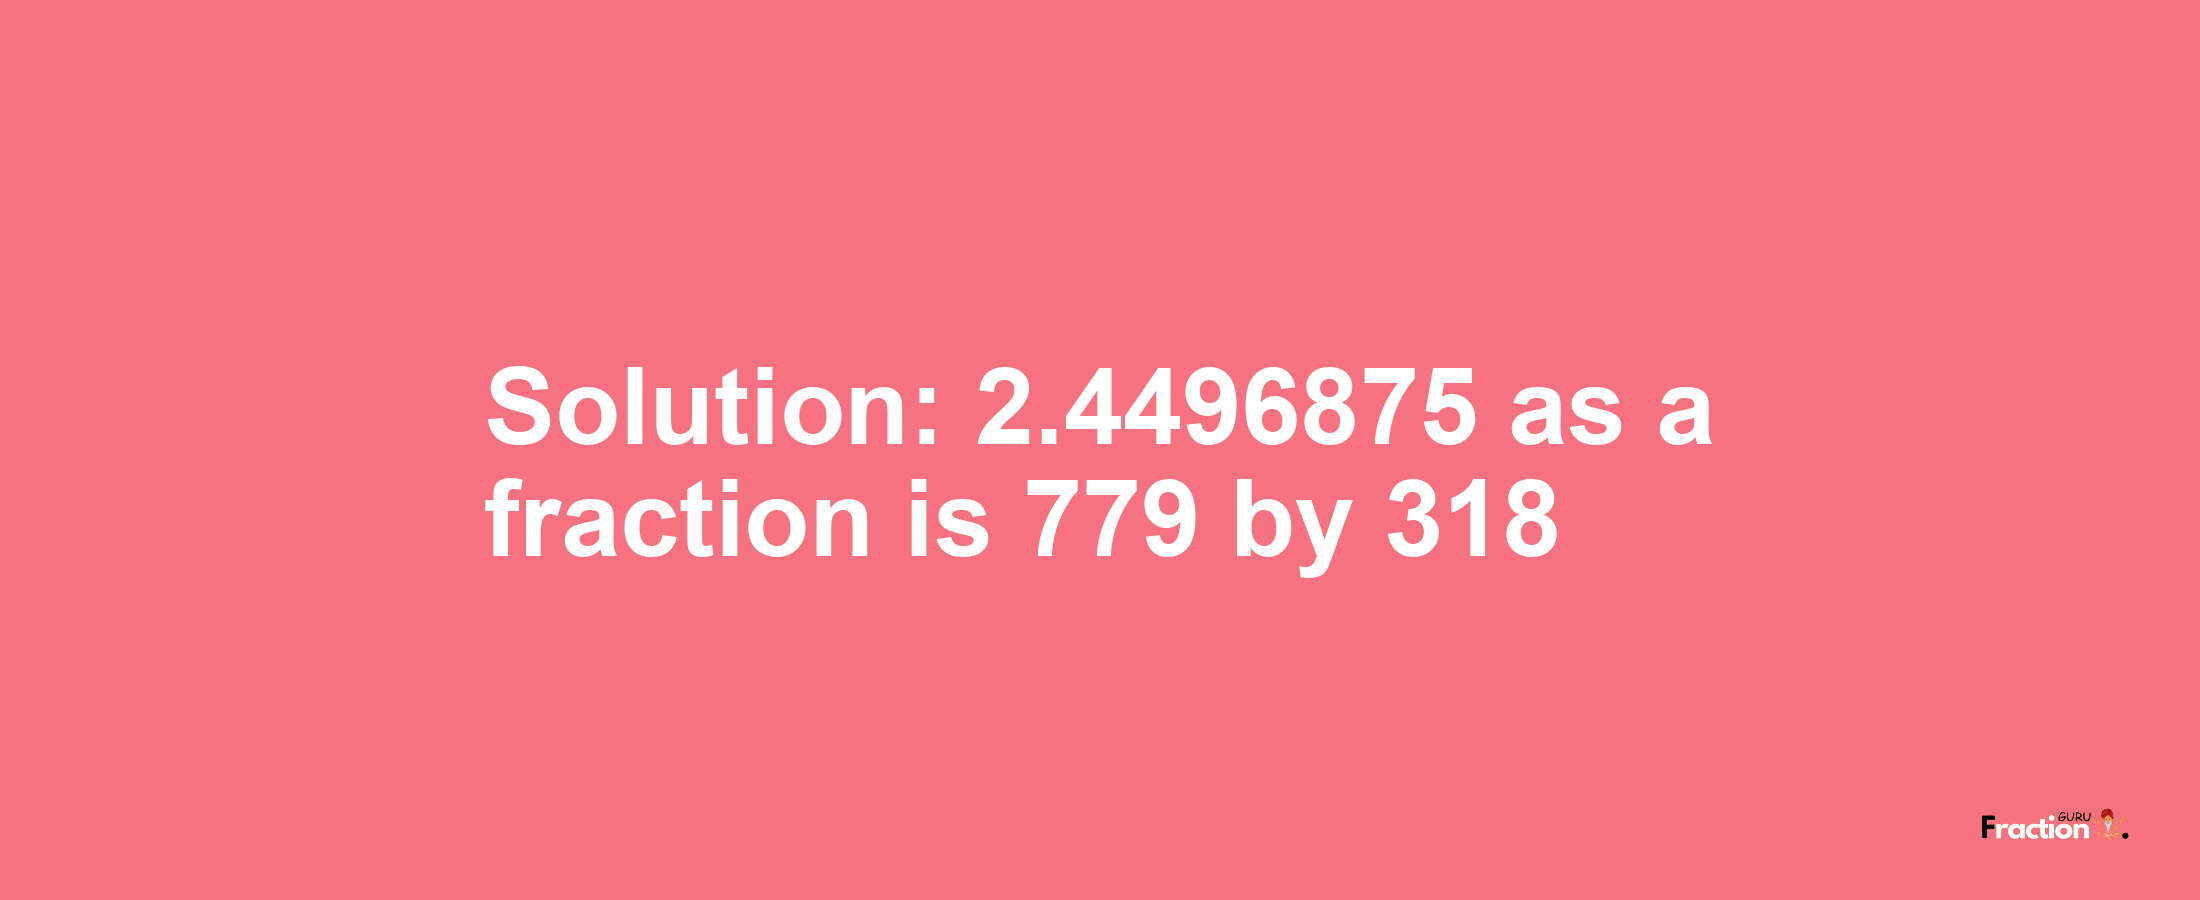 Solution:2.4496875 as a fraction is 779/318